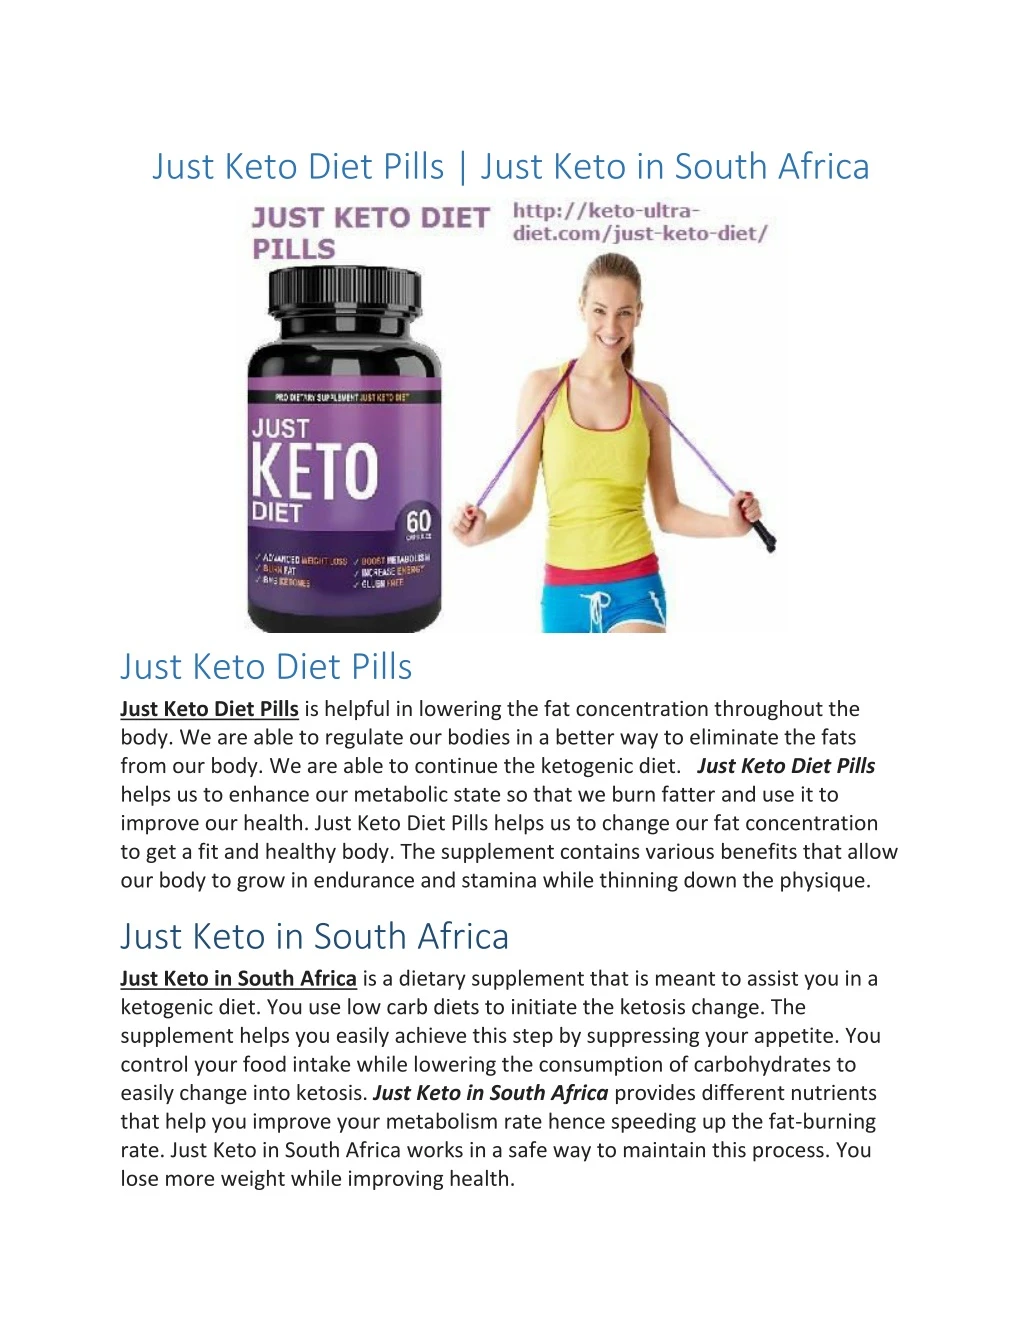 just keto diet pills just keto in south africa